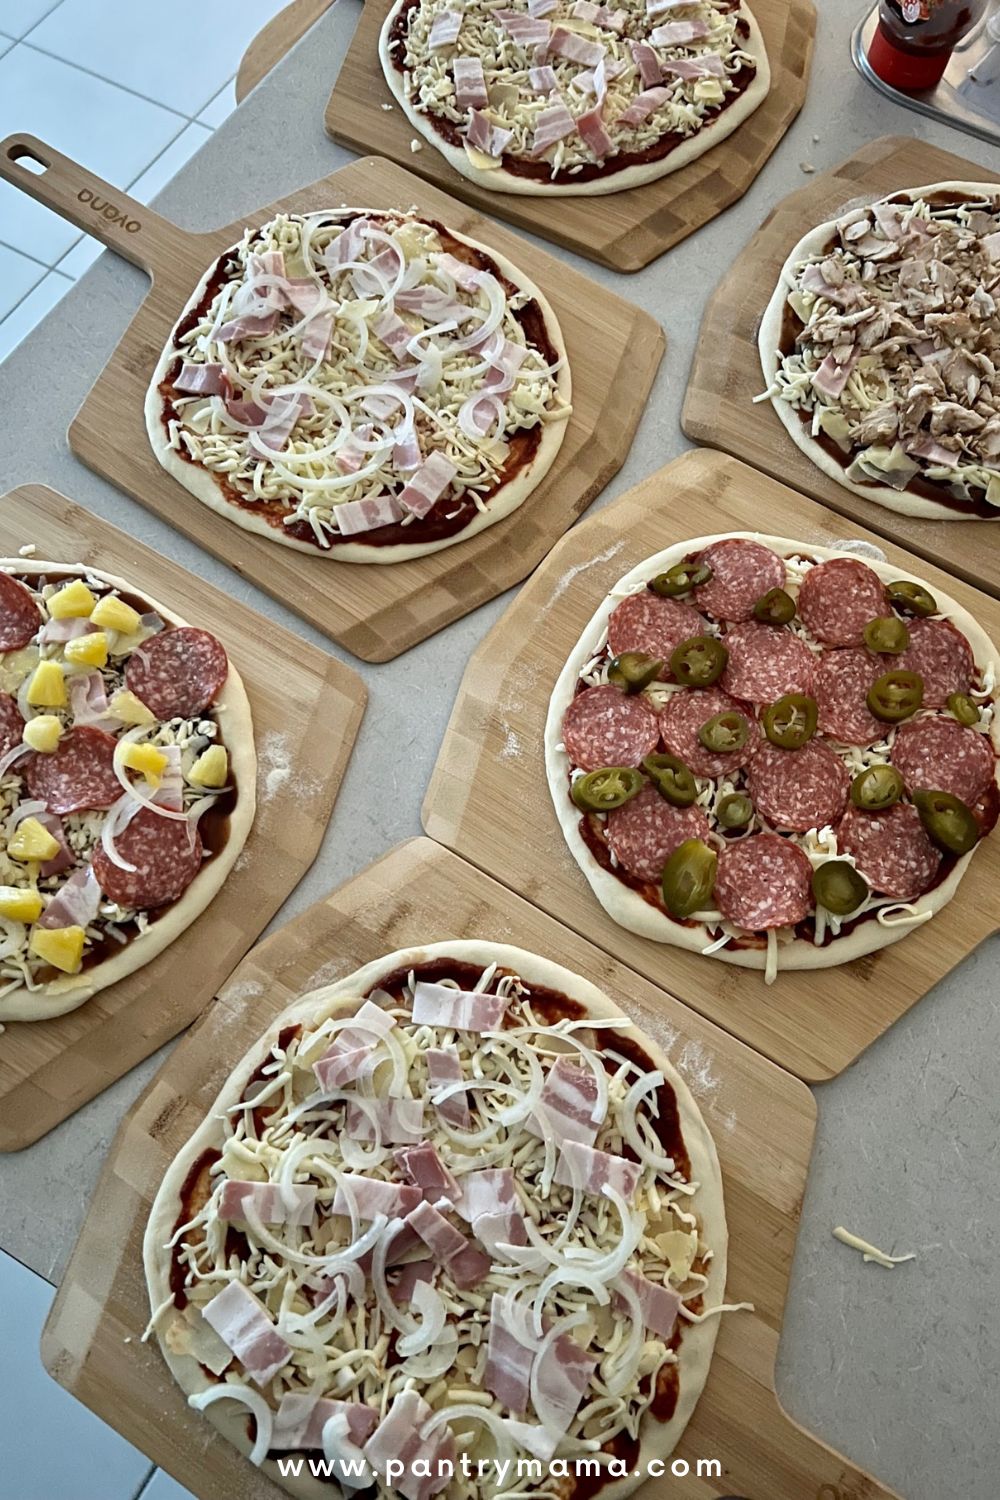 afsked kant parade Best Pizza Toppings for Homemade Pizza - The Pantry Mama